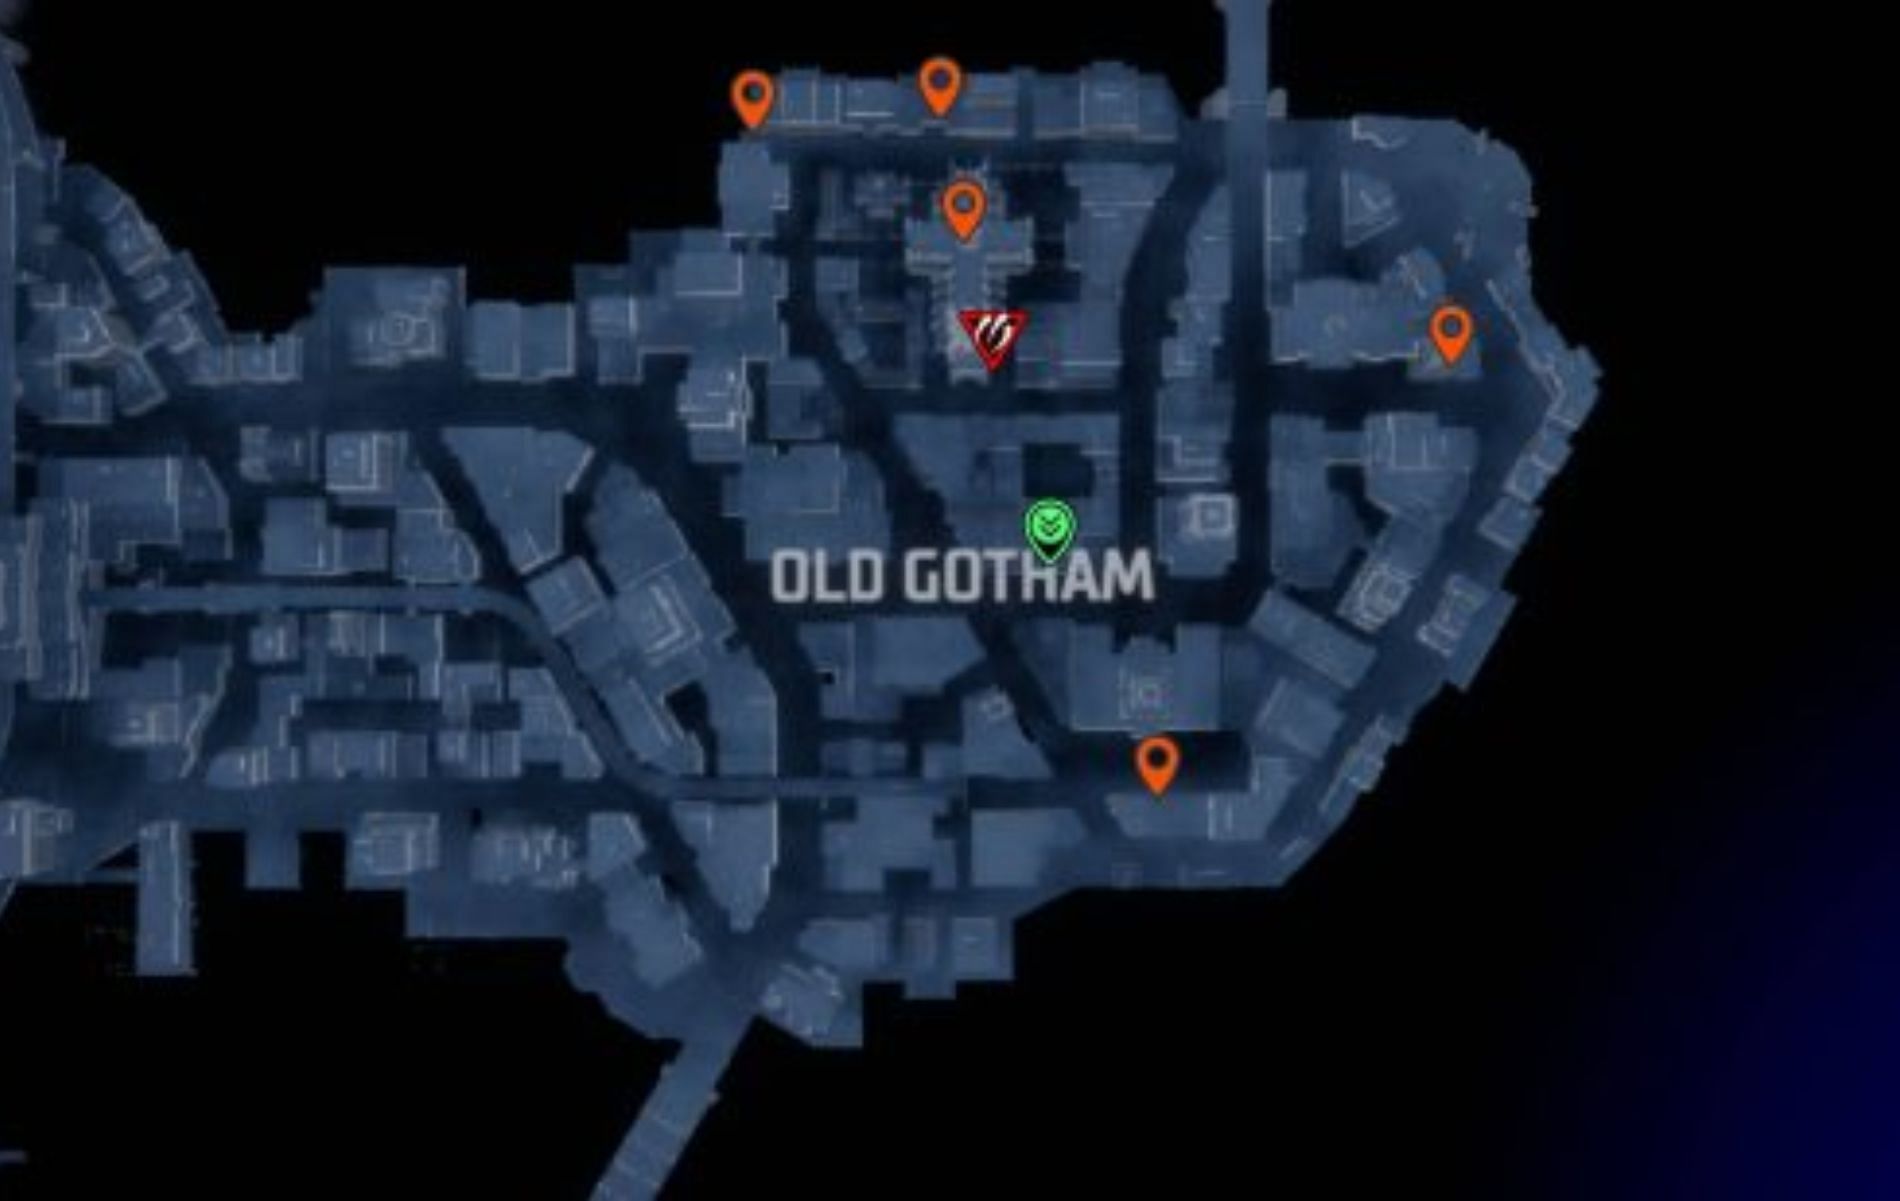 Map to locate Batarangs in Old Gotham (image via WB Games)